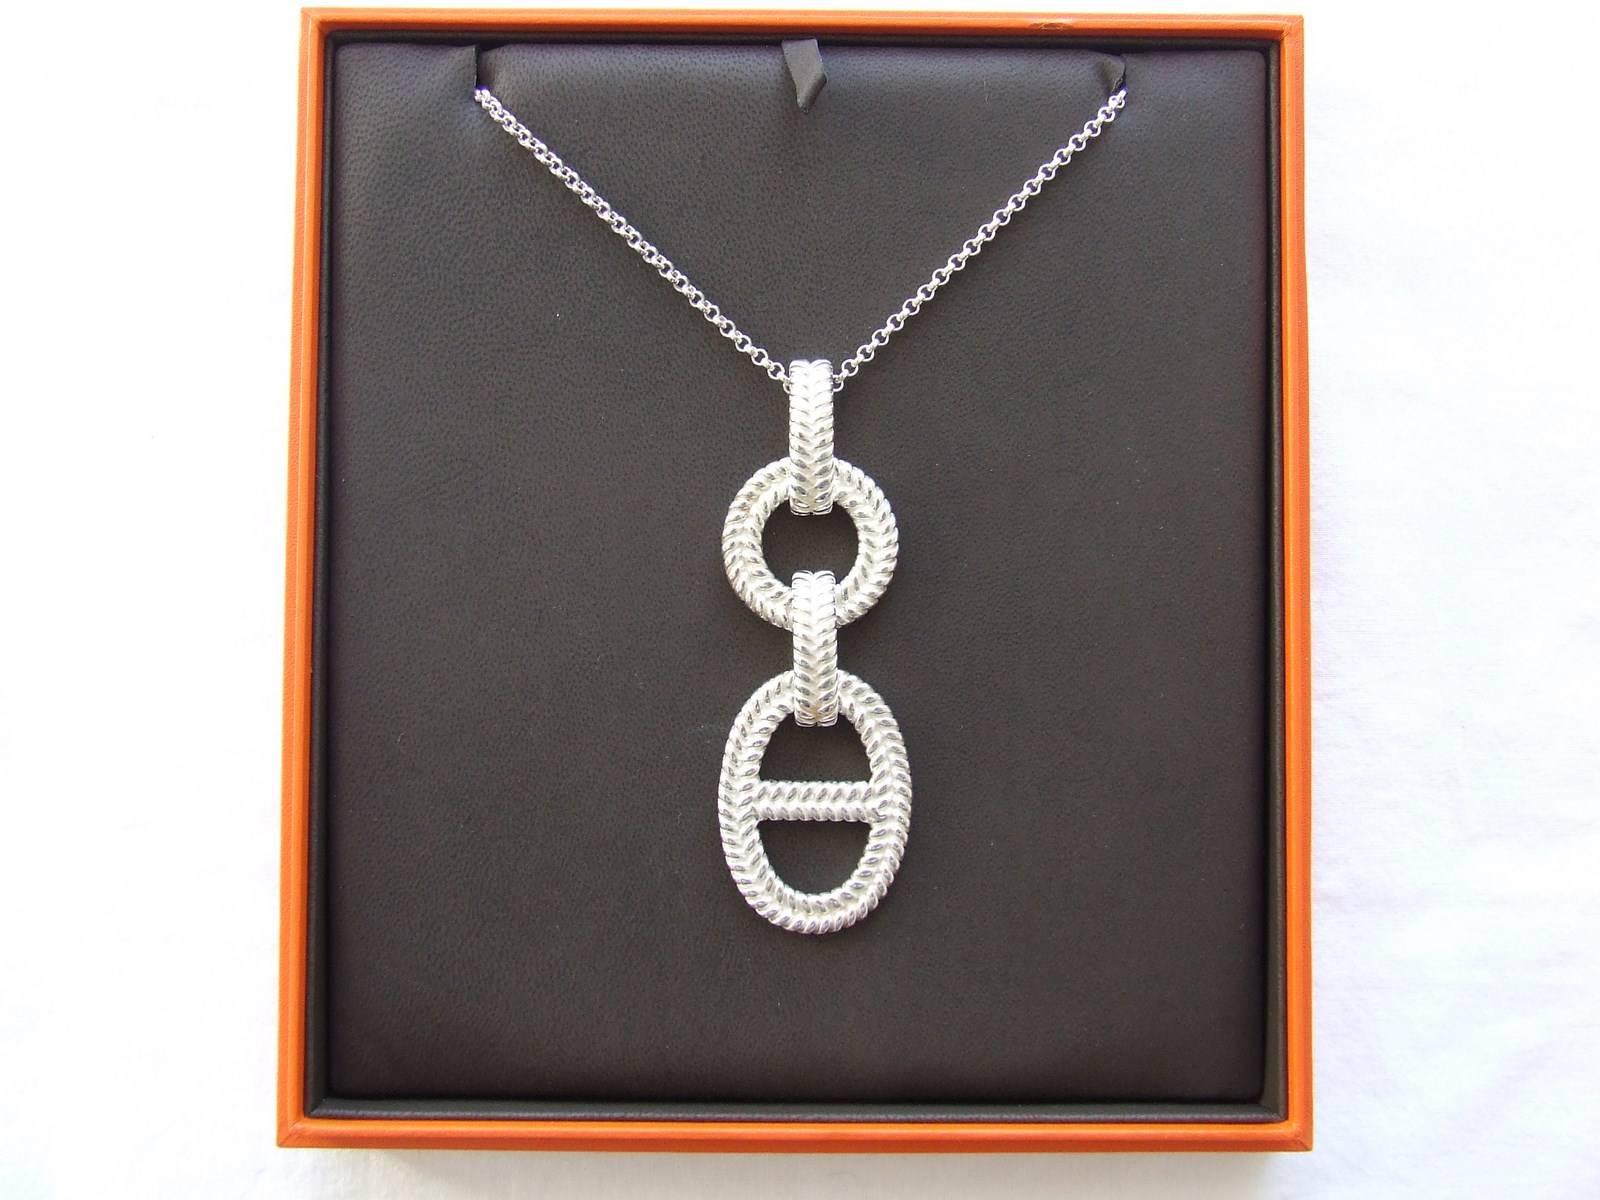 RARE AND GORGEOUS Authentic Hermes Necklace

Impossible to find ! Extremely rare

"Odyssée" Collection

Retail price: more than $ 4,000

Pendant representing a round and an anchor chain (chaine d'ancre)

Made in France

Made